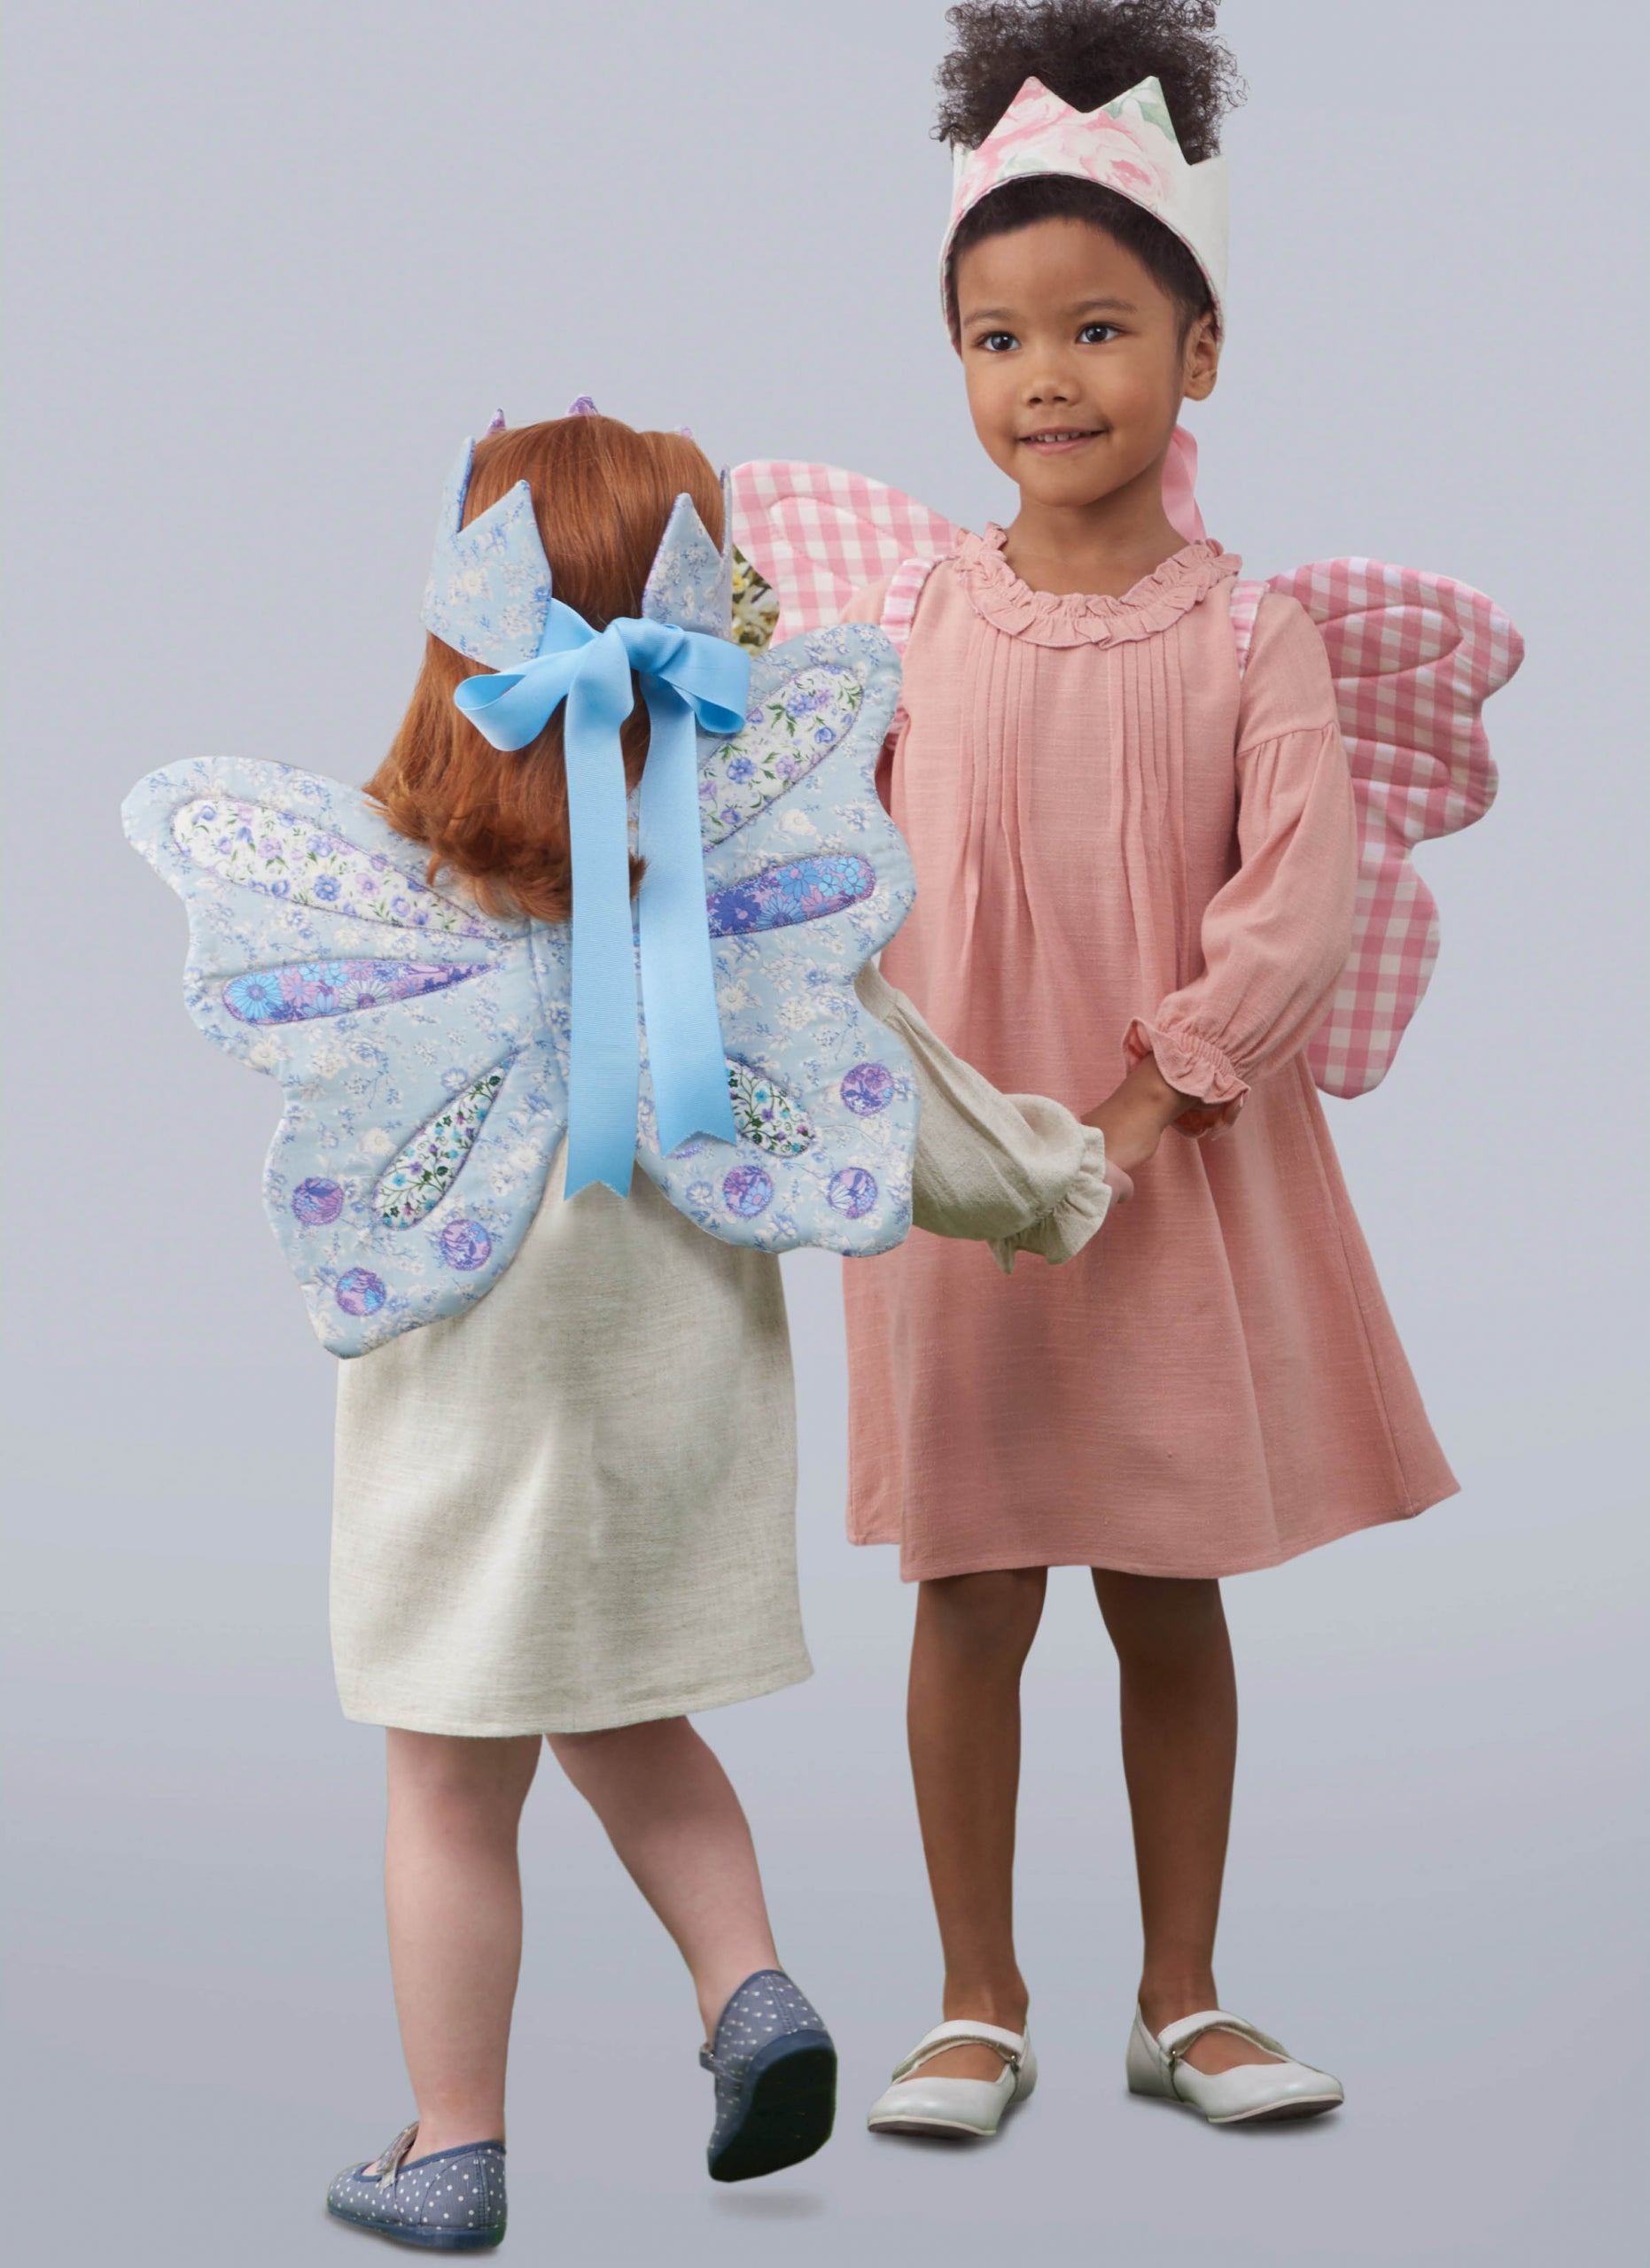 Simplicity S9765 Children's Backpack and Wings pattern from Jaycotts Sewing Supplies